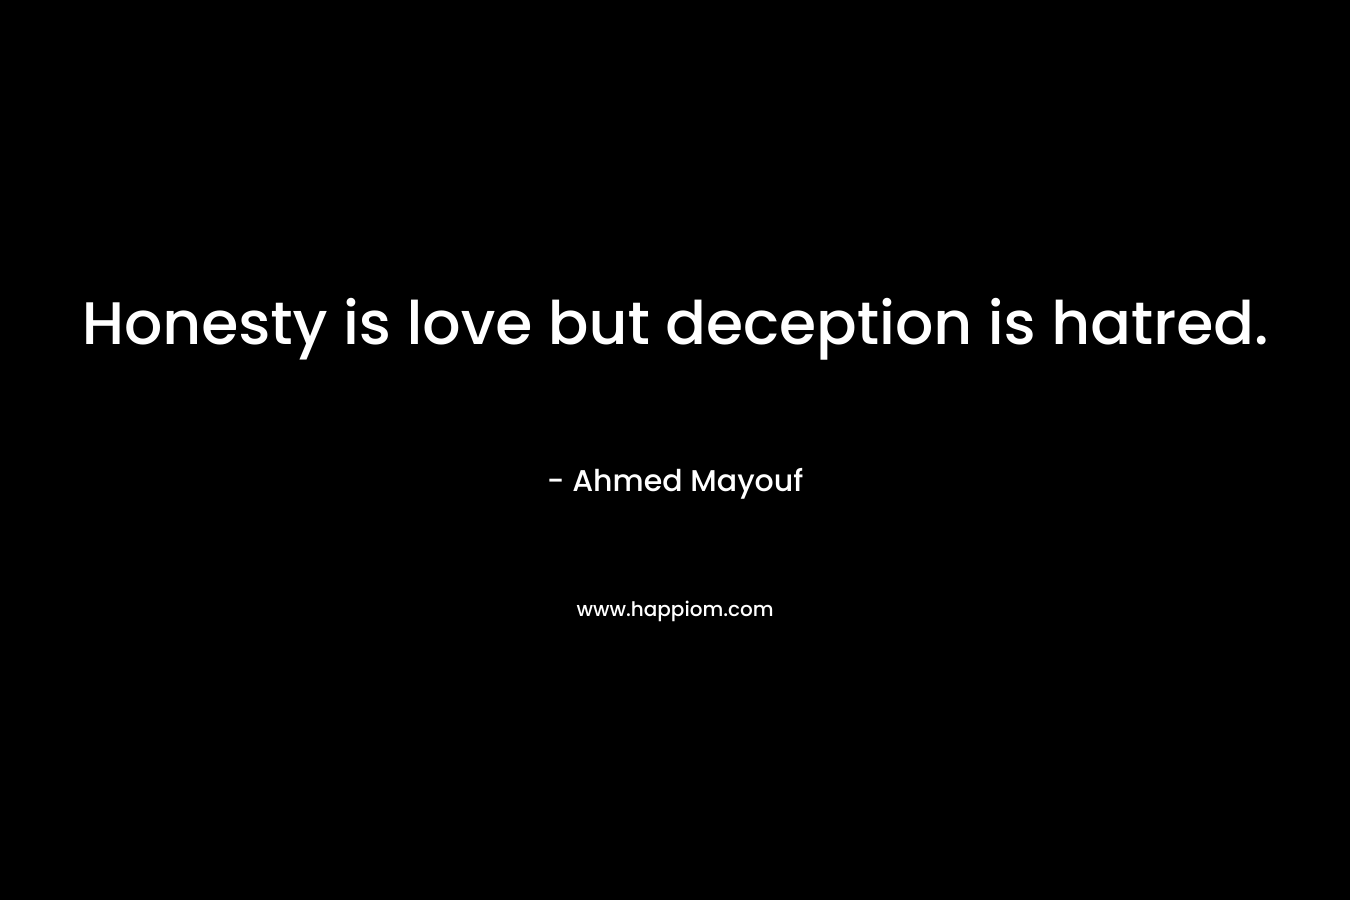 Honesty is love but deception is hatred.